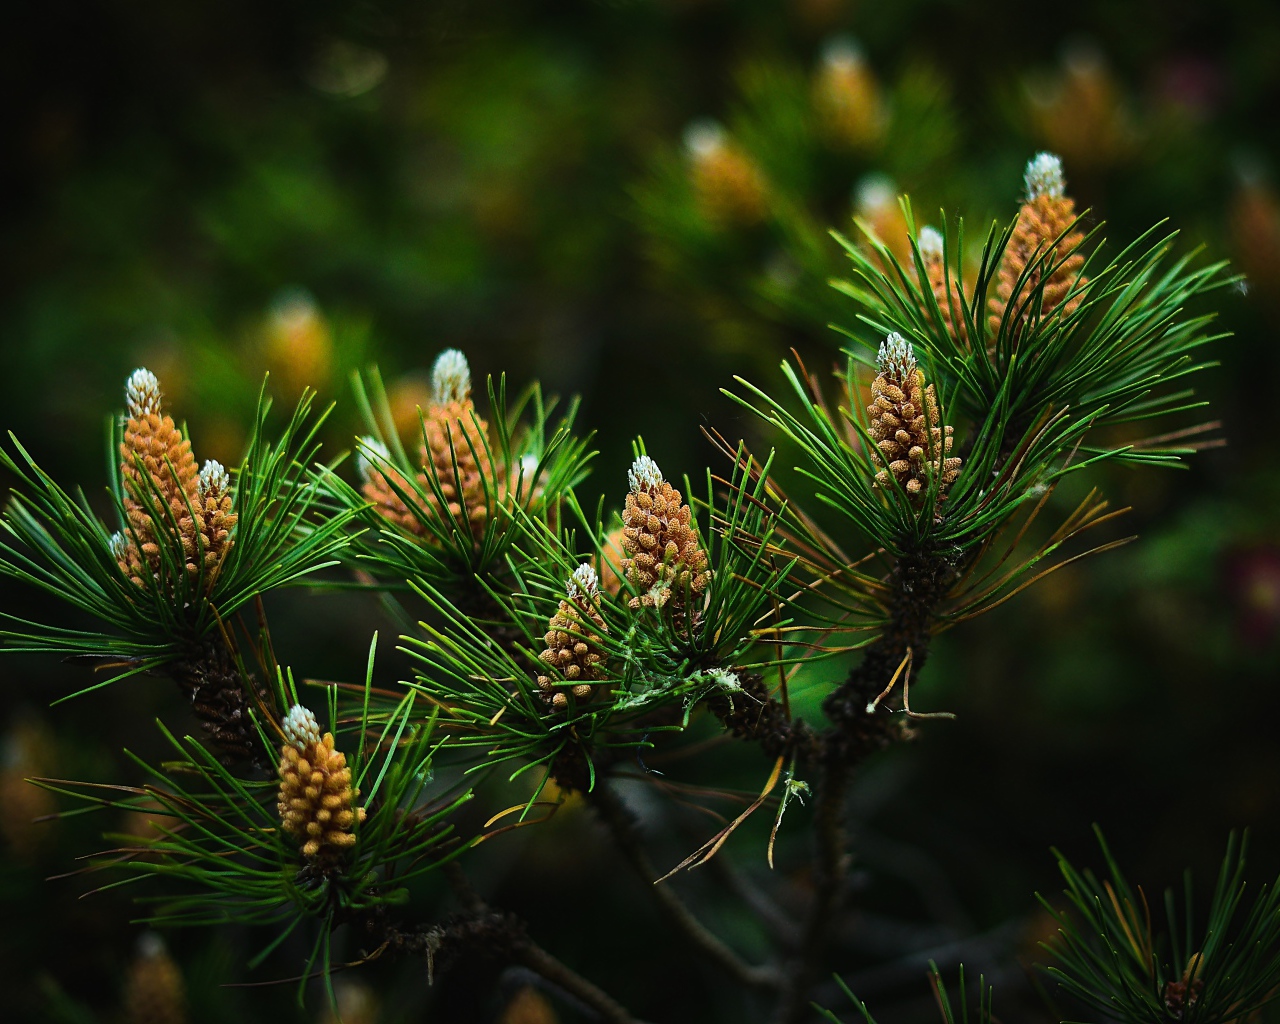 Young pine cones with green needles on branches